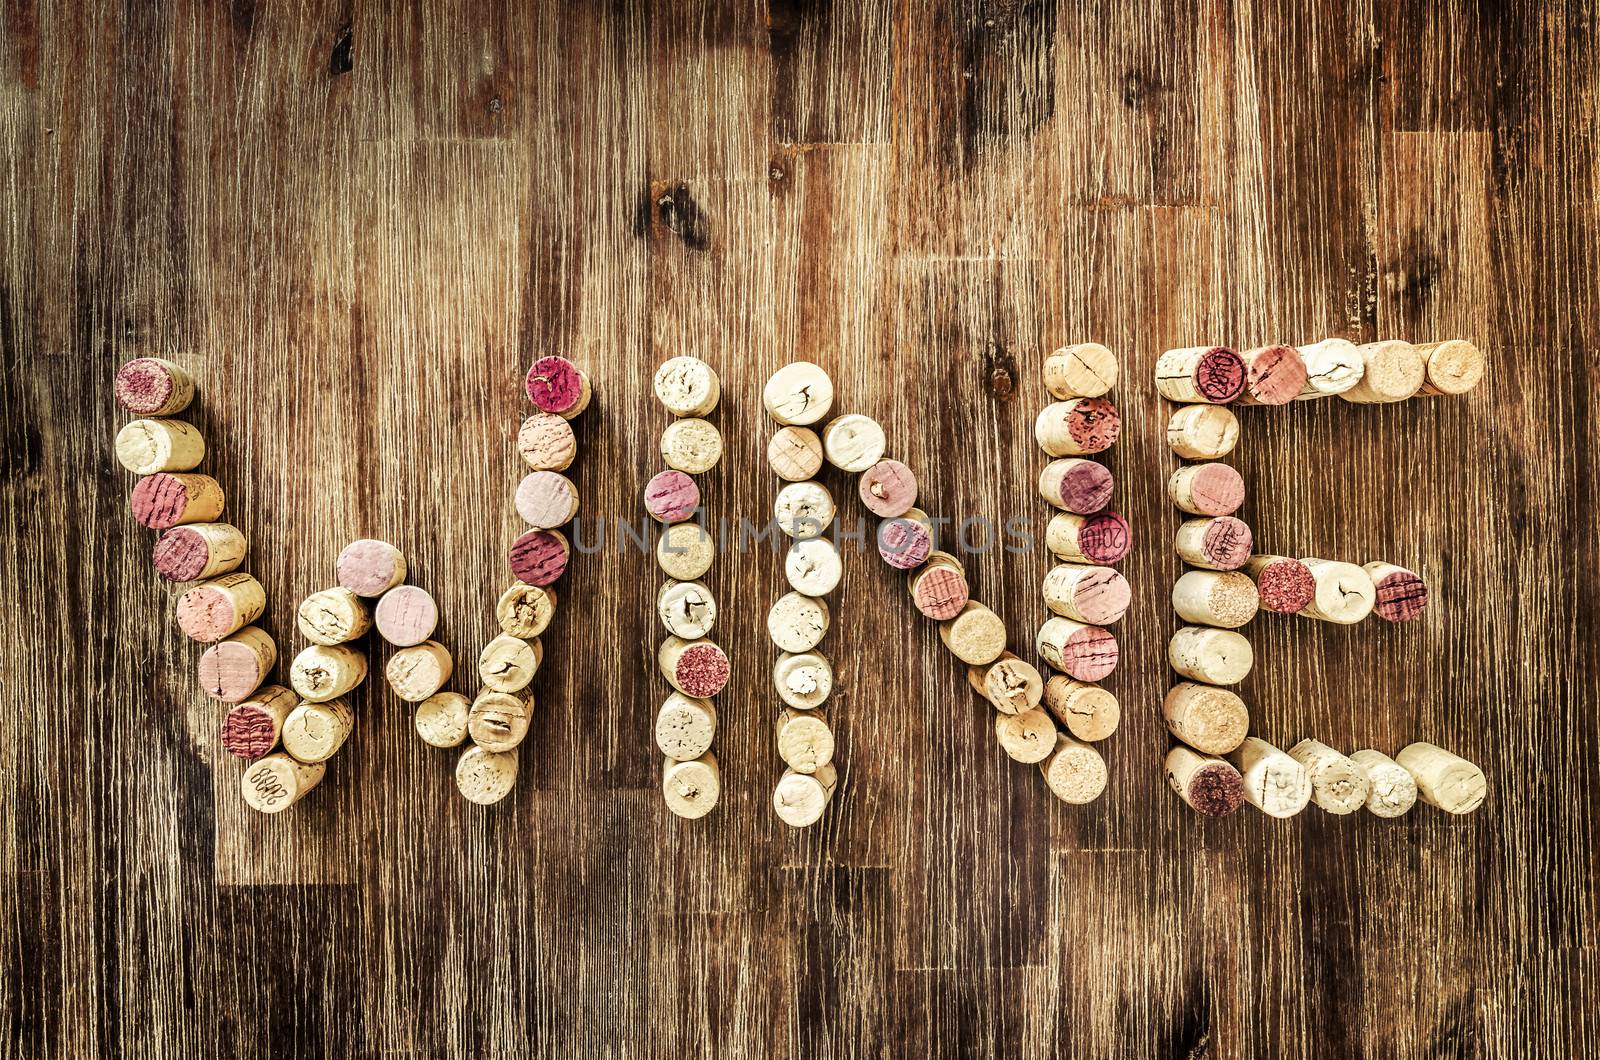 Sign wine made from corks laid on wooden vintage table